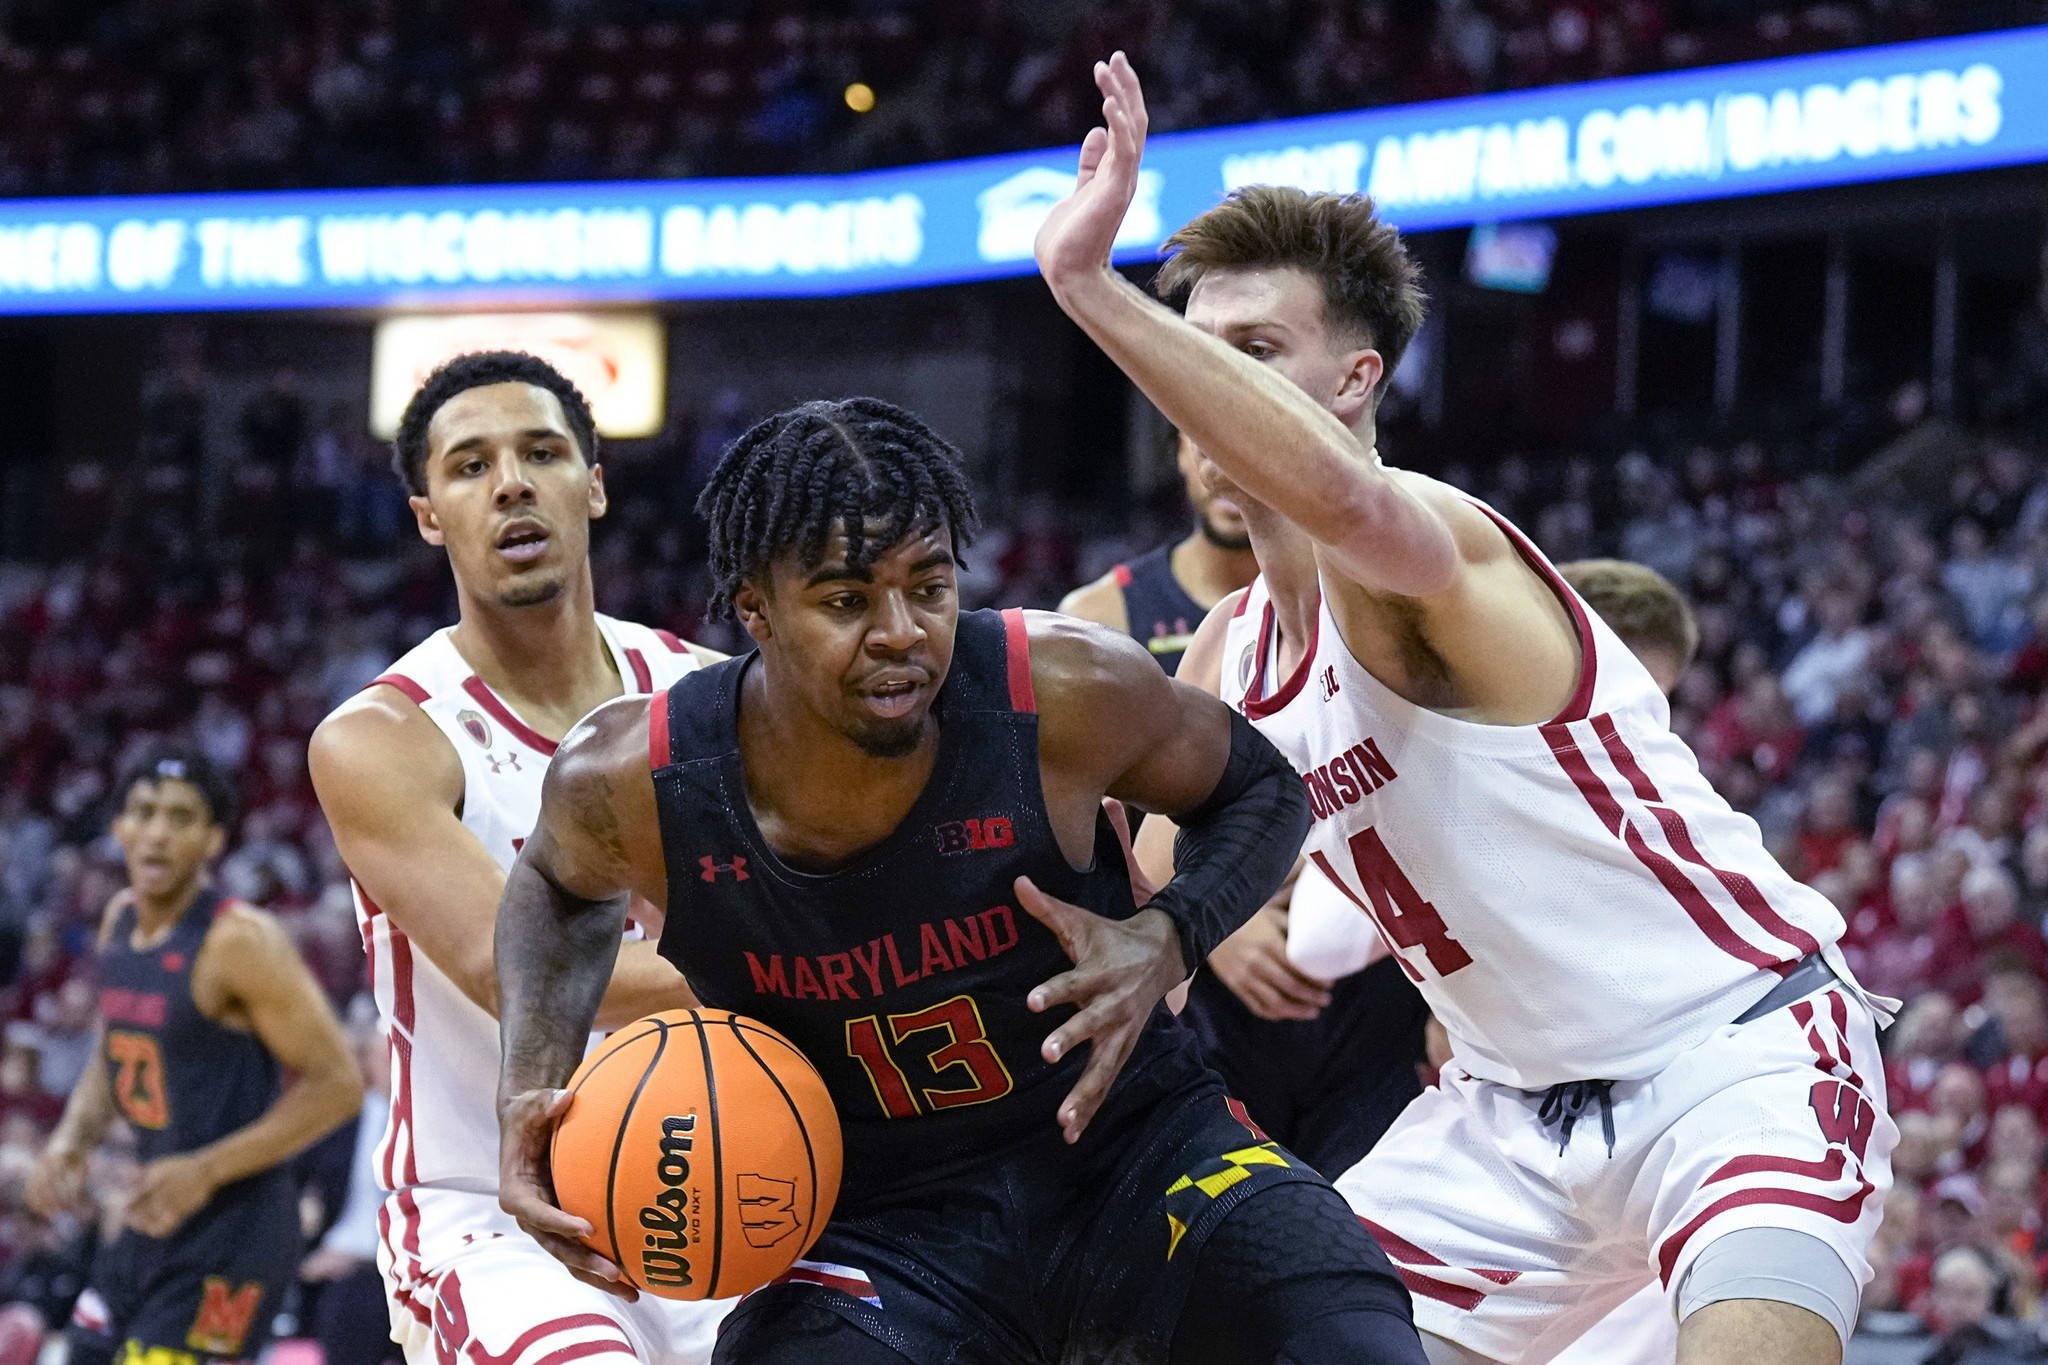 Three takeaways from No. 13 Maryland men's basketball's first loss of the season, a 64-59 defeat to Wisconsin – Baltimore Sun